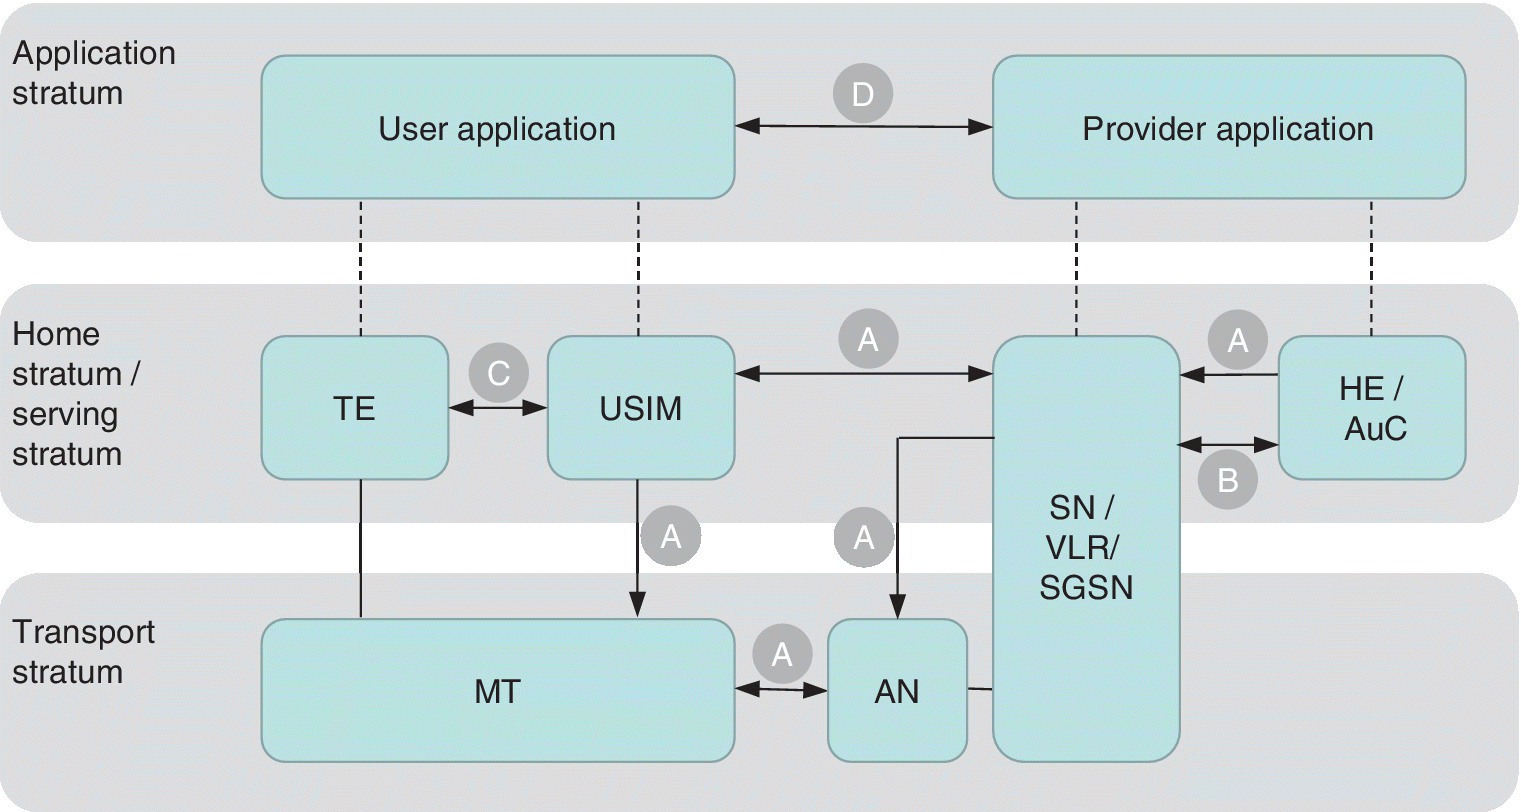 Block diagram of the 3GPP security architecture illustrating three layers (top–bottom): application (user and provider); home/serving (TE, USIM, HE/AuC, etc.); and transport (MT and AN).